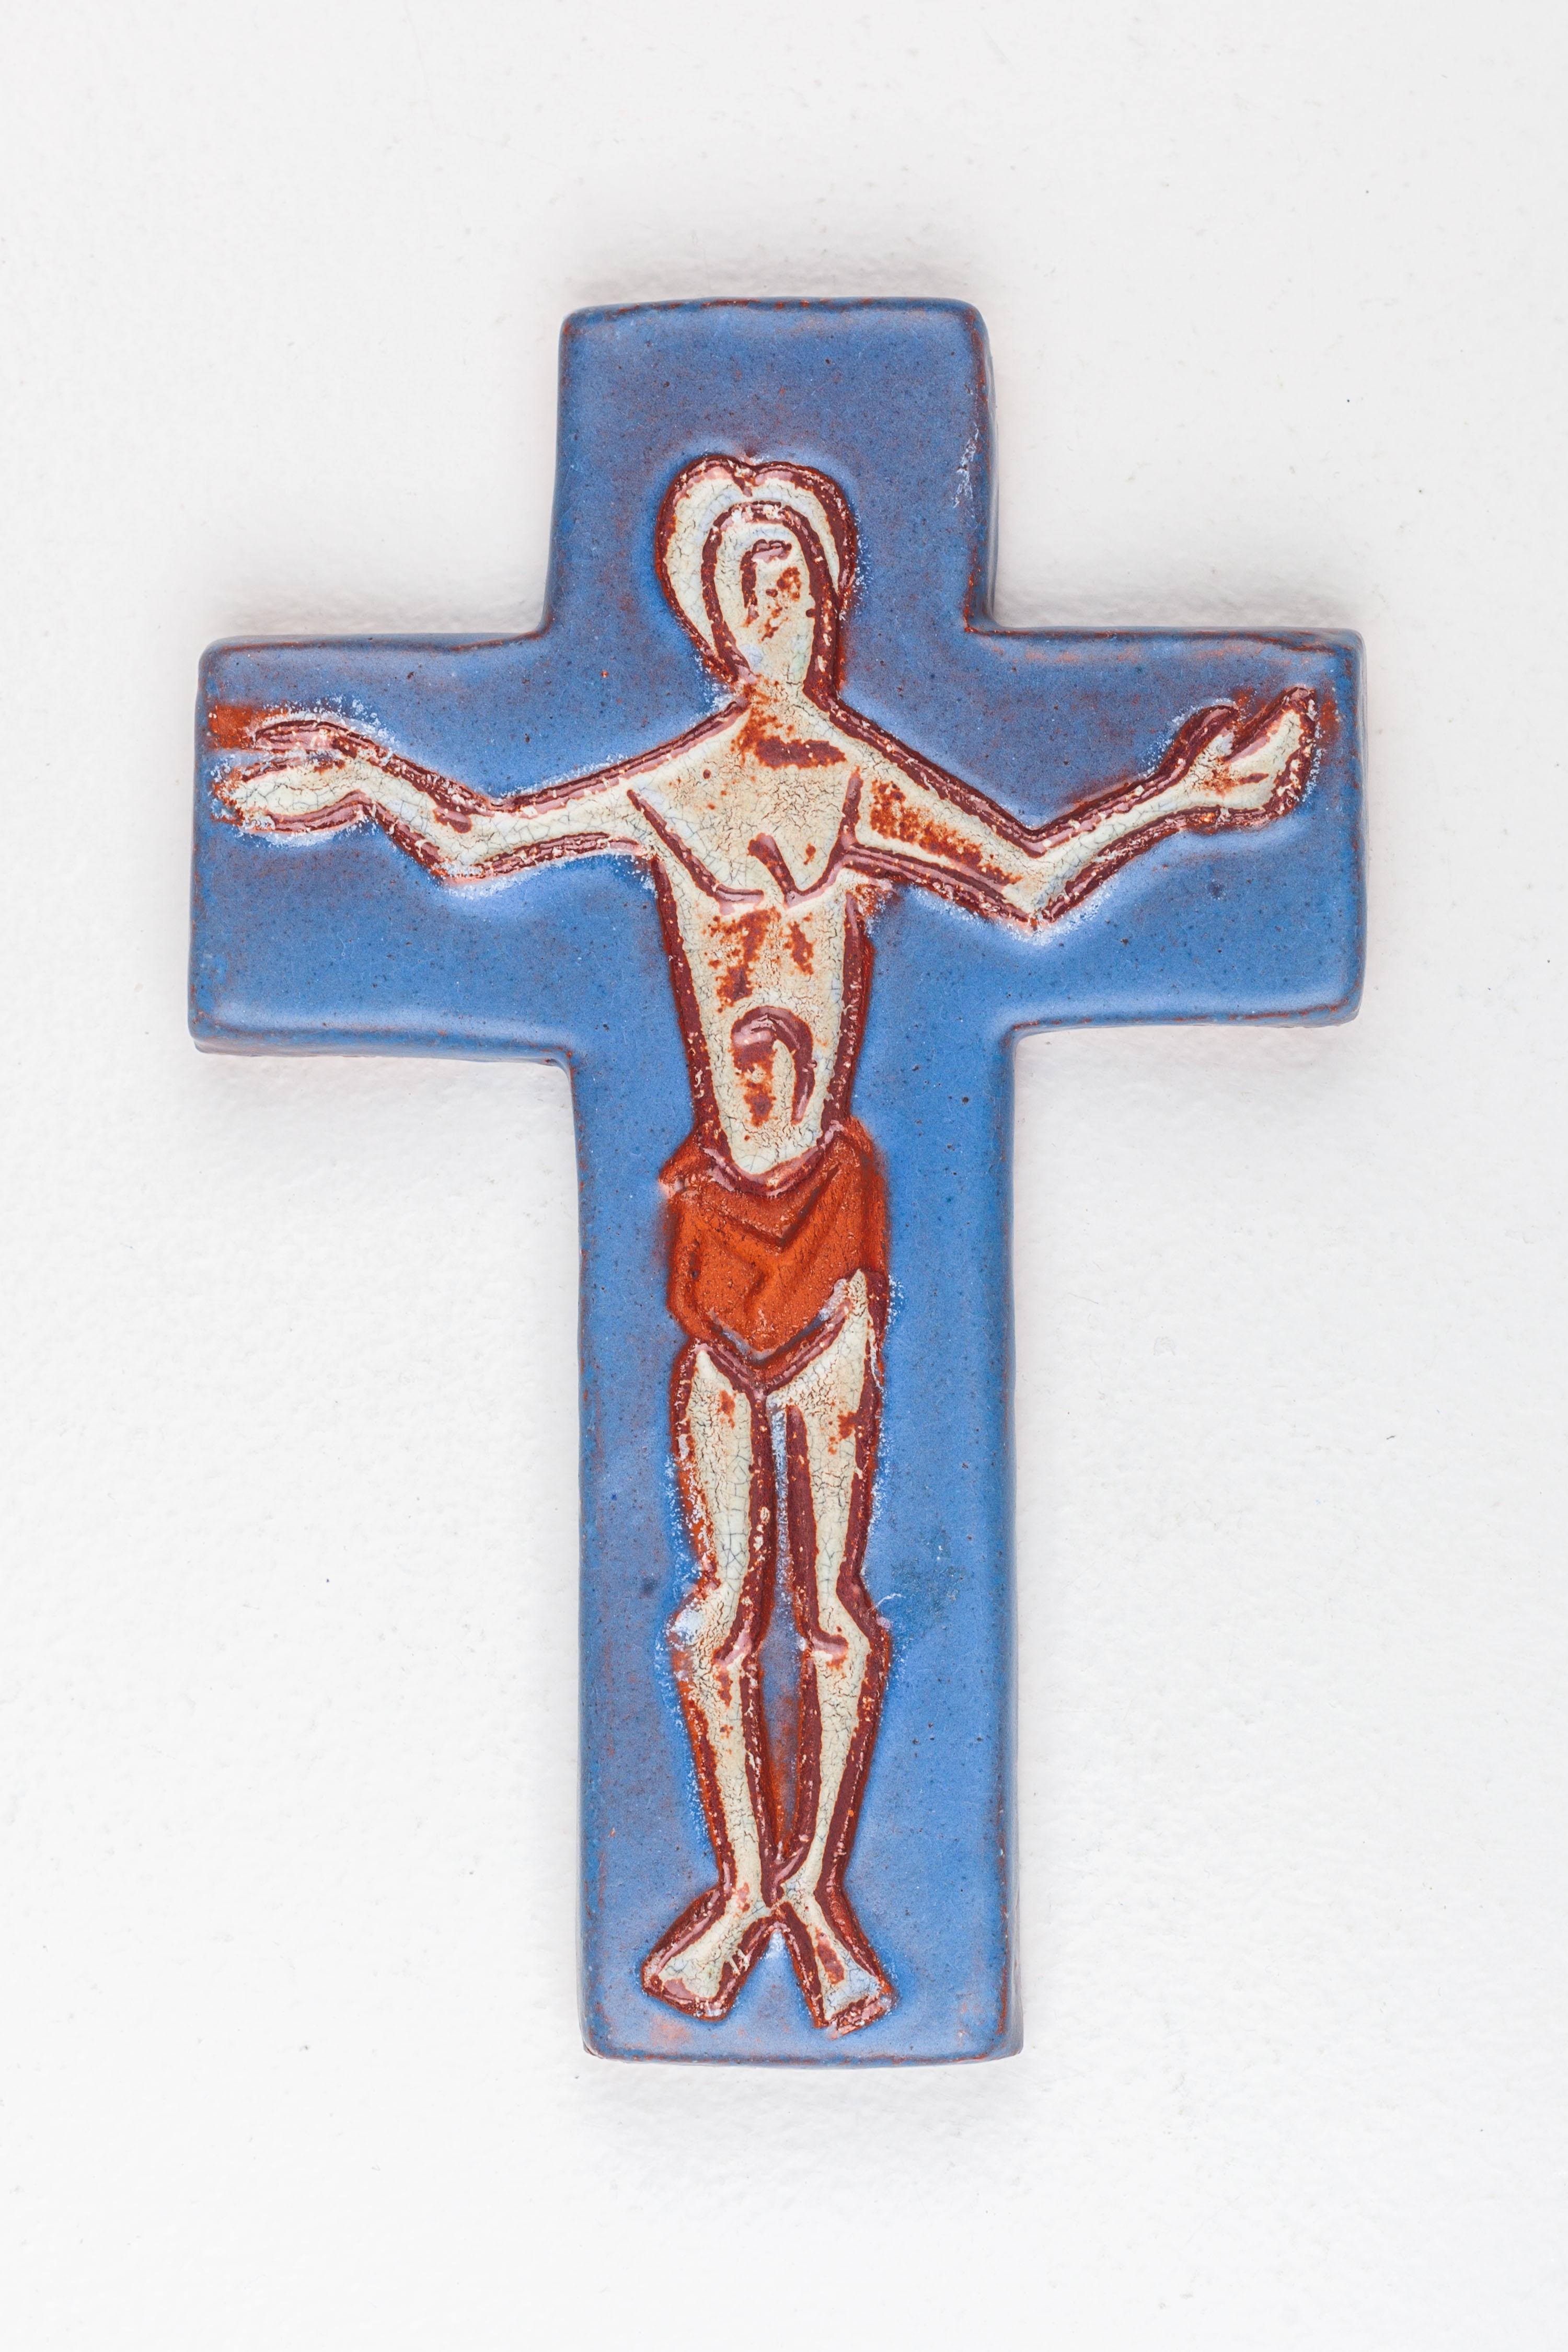 A blue ceramic cross with an abstract line-drawn Christ swathed in a rust-colored fabric. This cross seamlessly merges the profound symbolism of religious iconography with an experimental edge, creating a visually interesting cross.

Each cross in